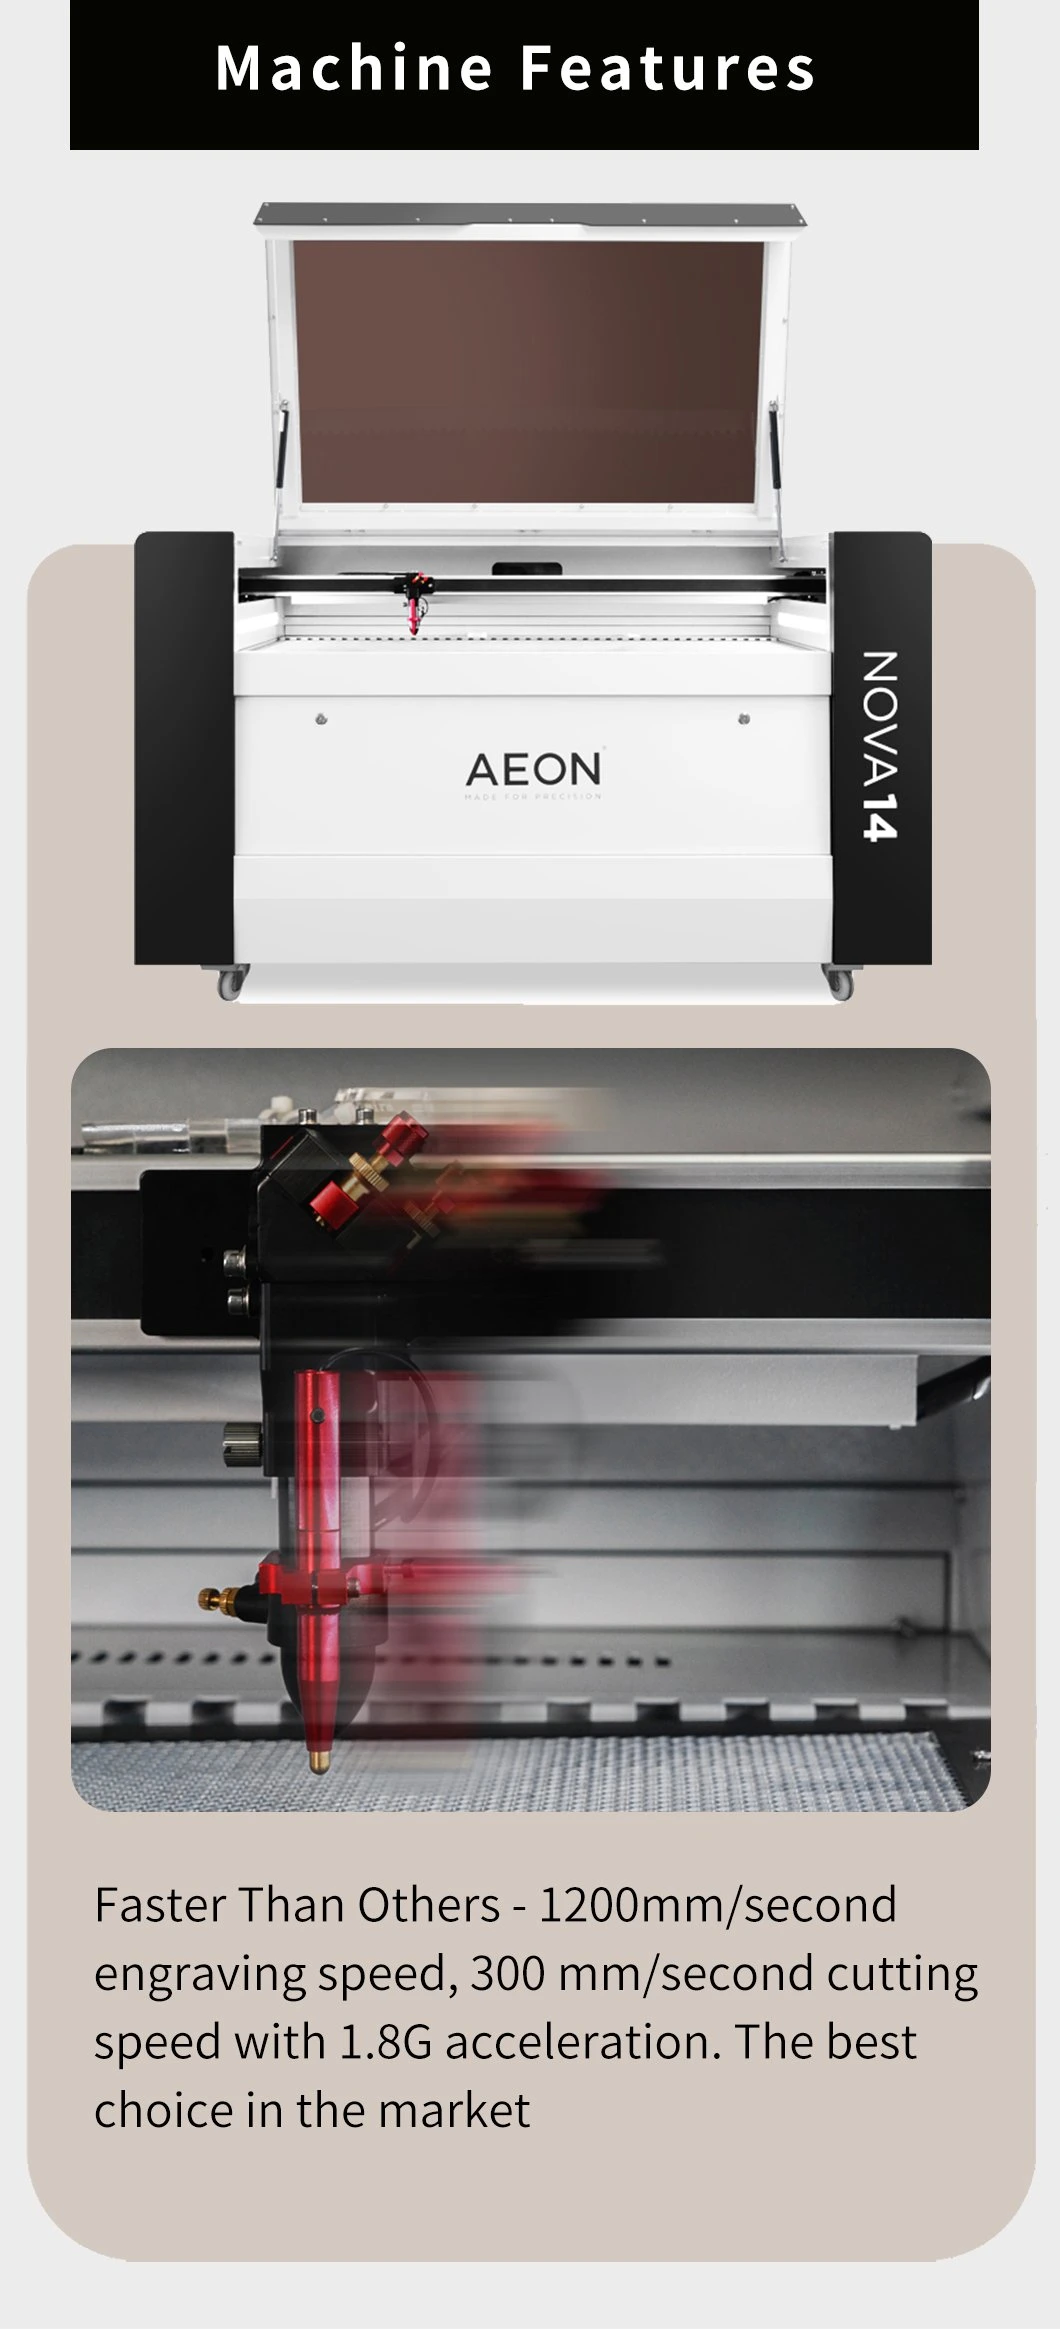 Nova14 55&quot; X 35&quot; Laser Etcher with Ruida Control System and Lightburn Software, Compatible with Windows, Mac Osx, Linux